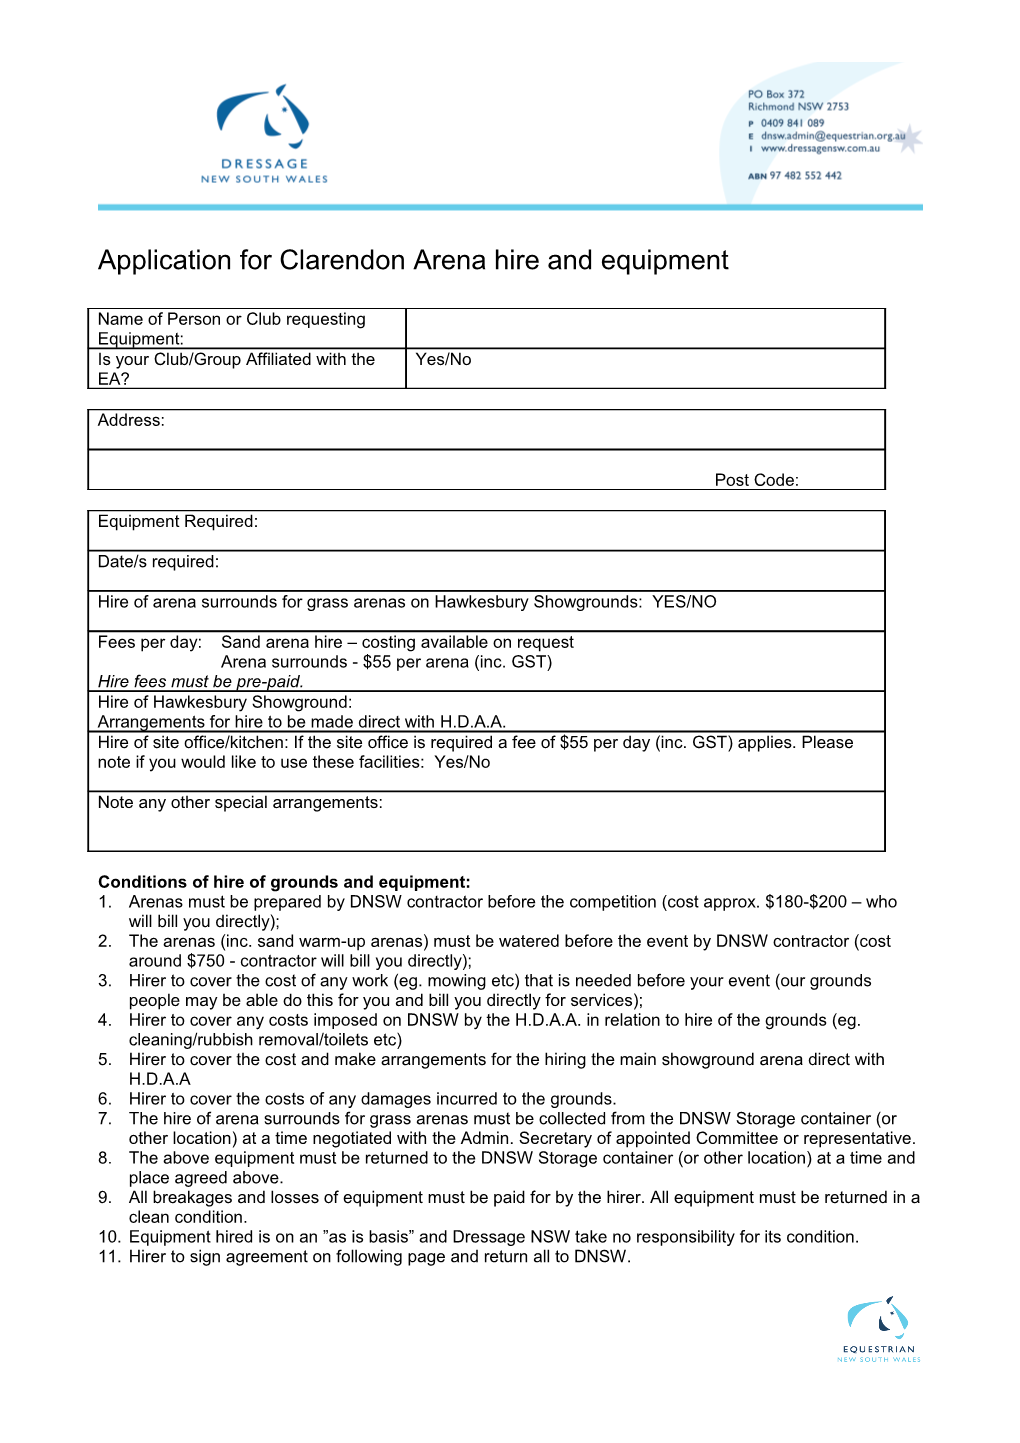 Application for Clarendon Arena Hire and Equipment